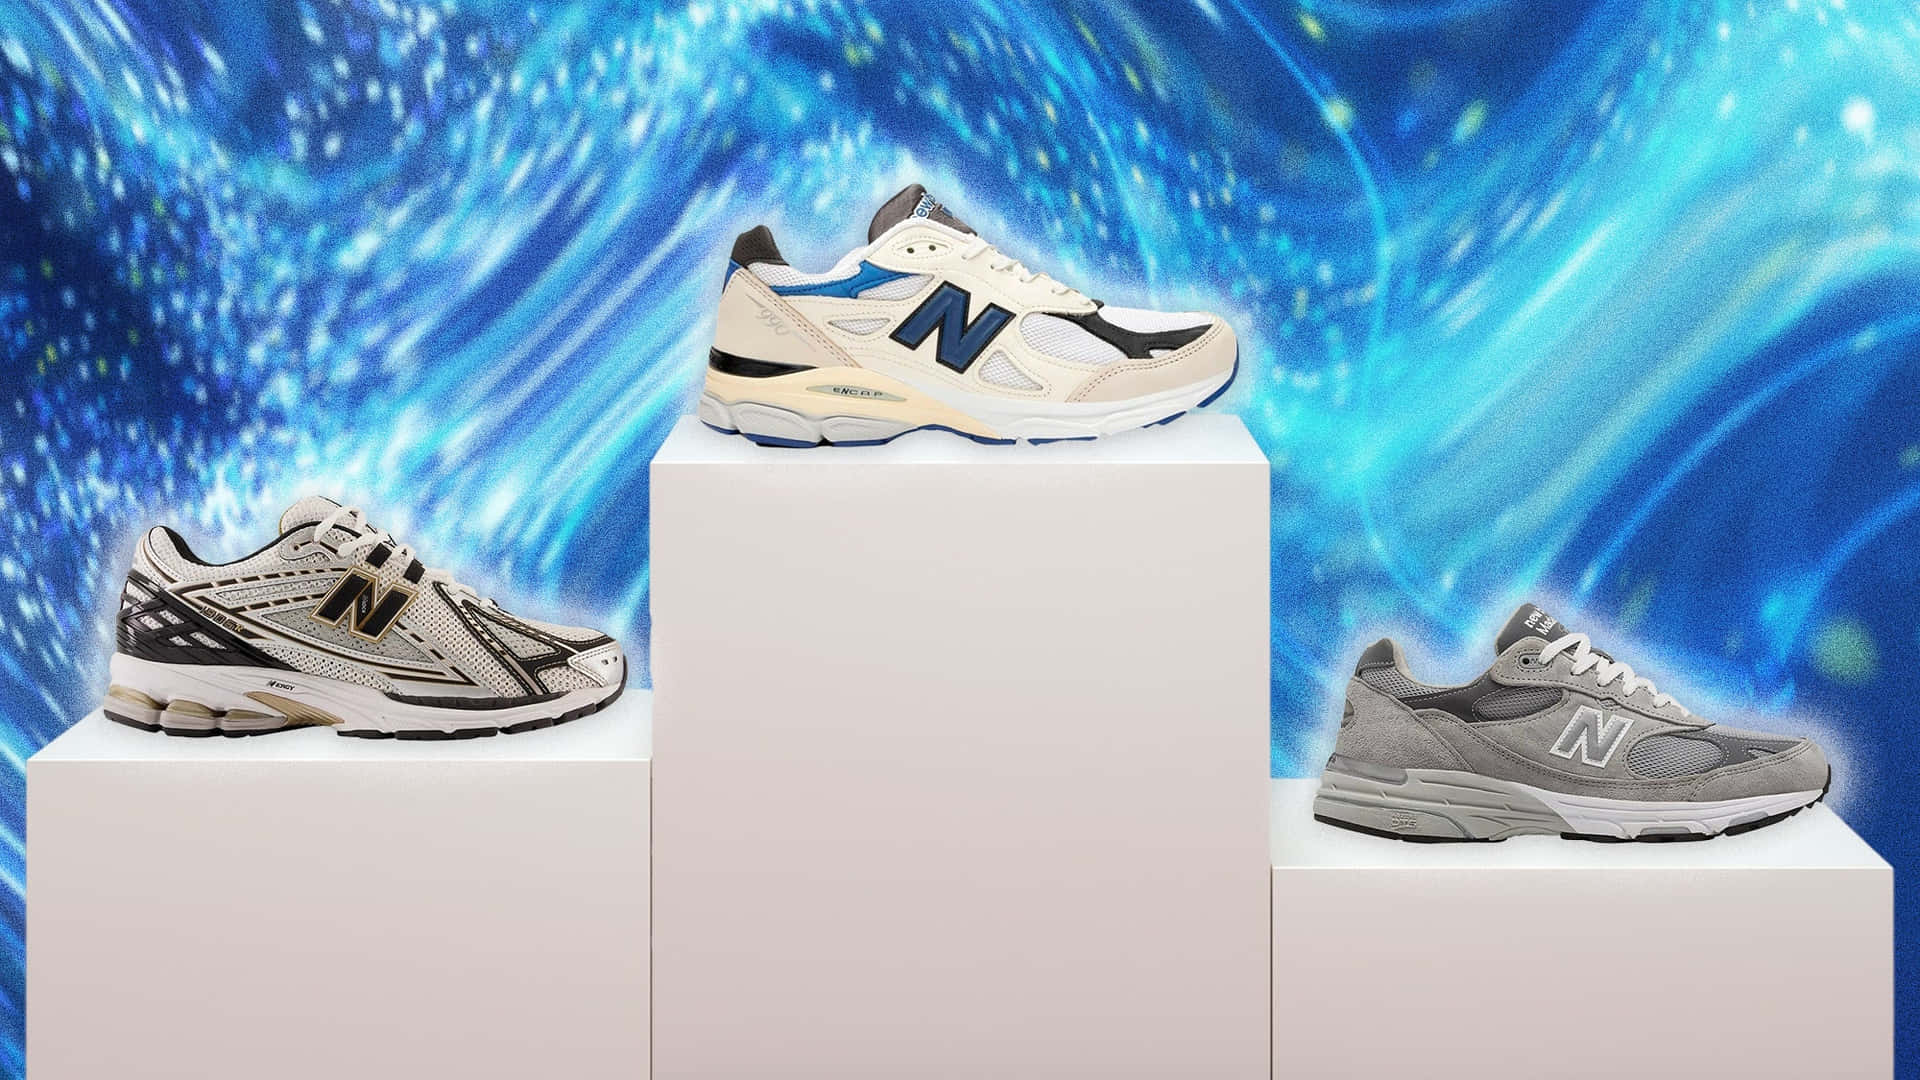 Image  Experience Comfort&Style With New Balance Shoes